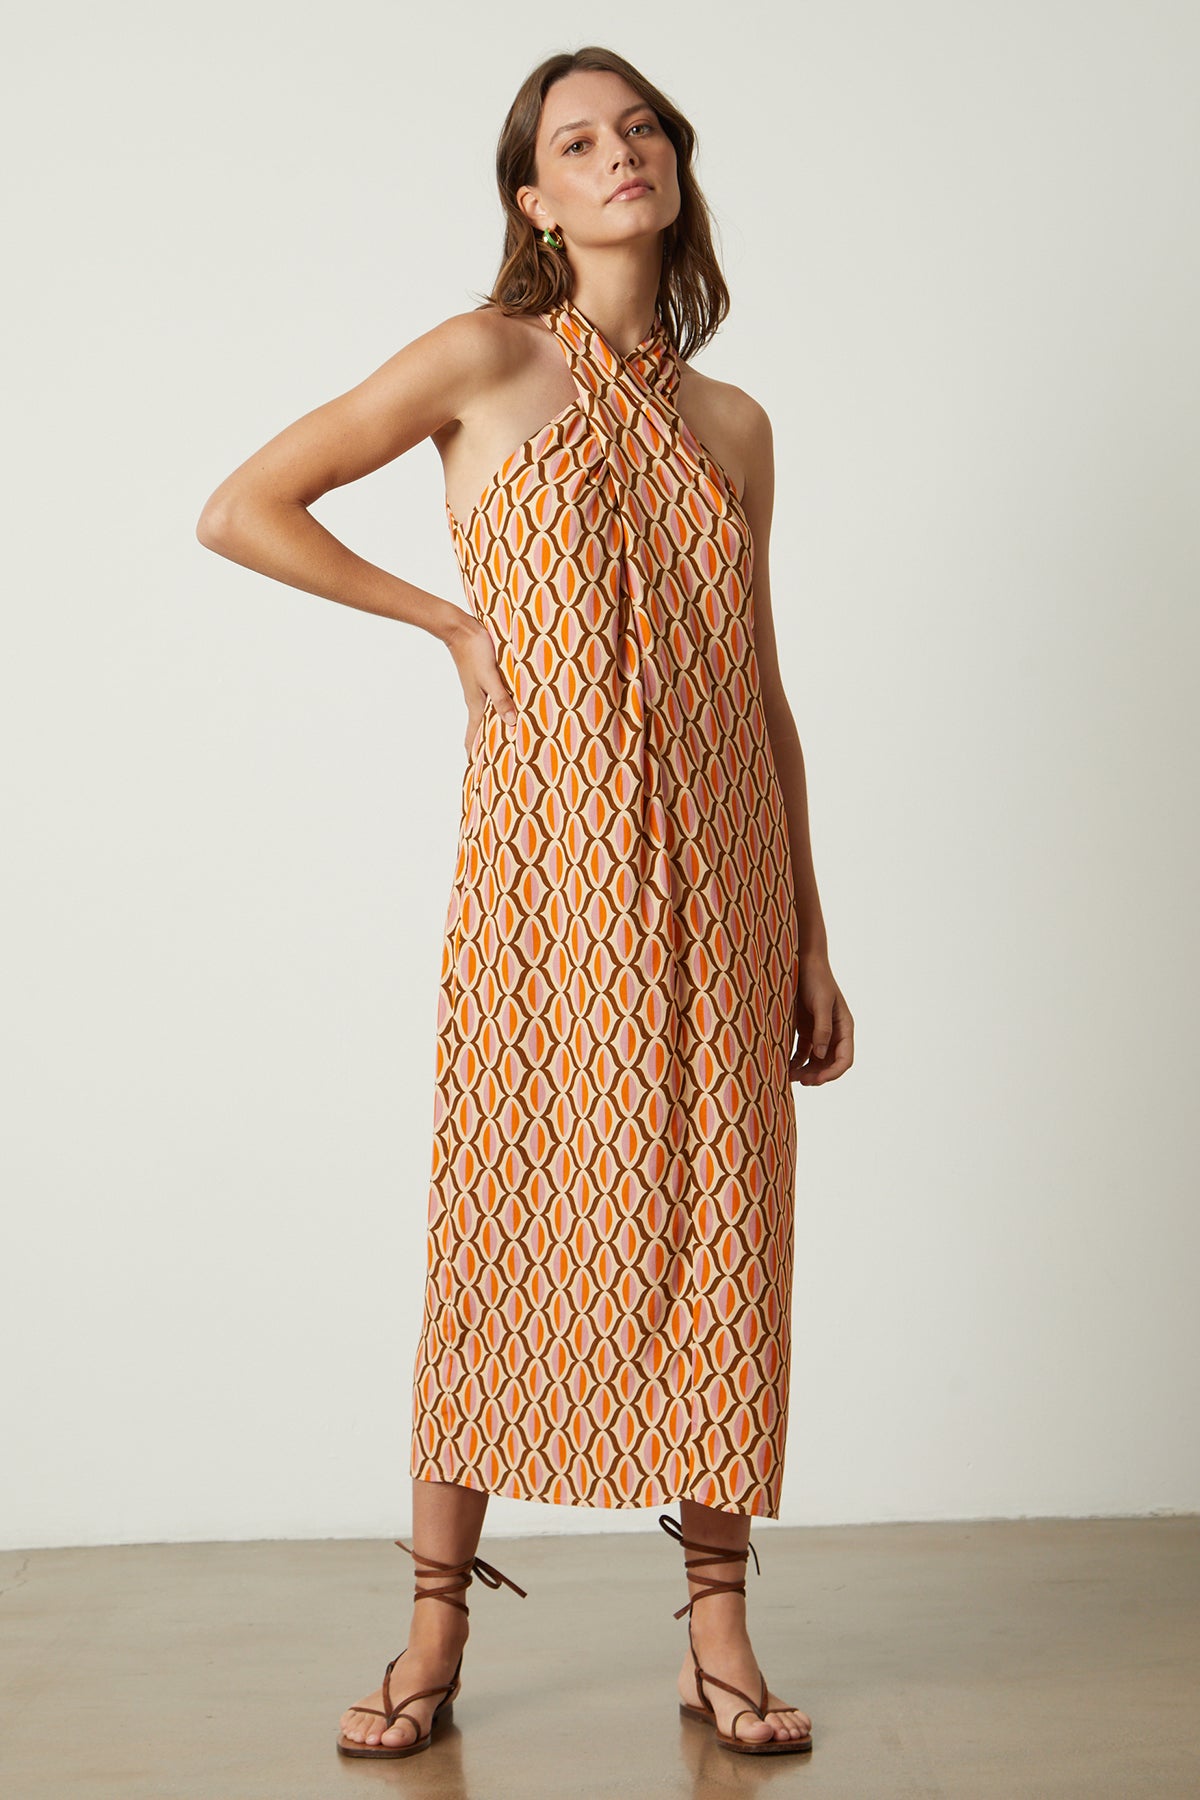 Women standing with hand on hip wearing Caterina dress in orange geometric pattern gold earrings and sandals full length front-26079026938049